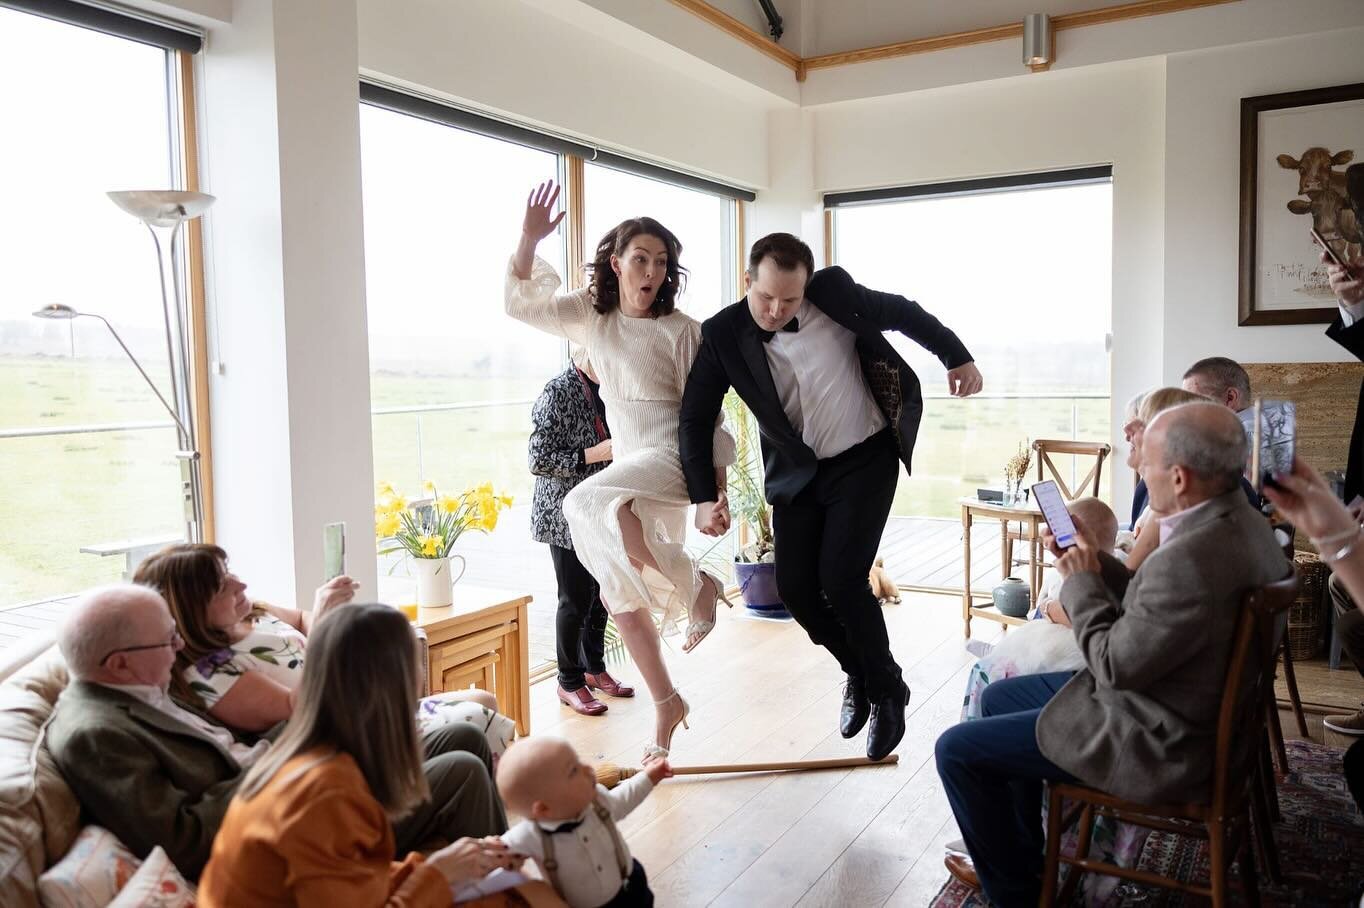 Yesterday I had the absolute honour of coordinating the wedding of Amy &amp; Andrew at Craigengar Lodge.
.
Just look at these fab sneak peeks from @imagineimages especially this cracker of them jumping the broom after their ceremony 😍
.
It was such 